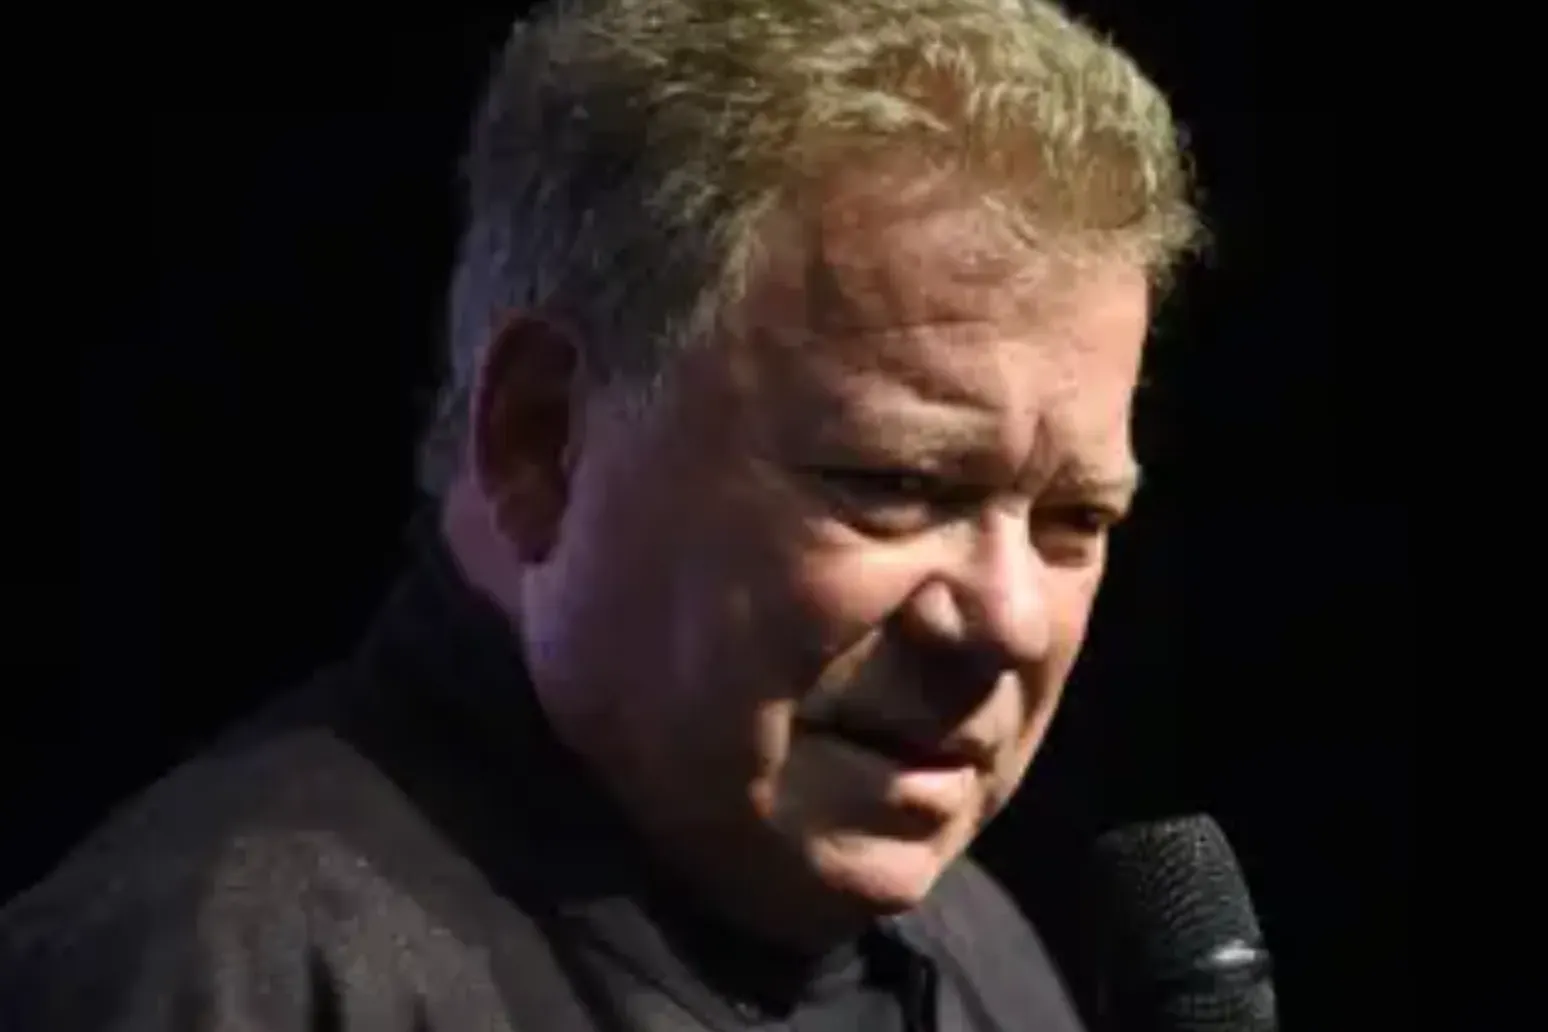 William Shatner says space trip hit home how society is ‘gambling’ with planet 